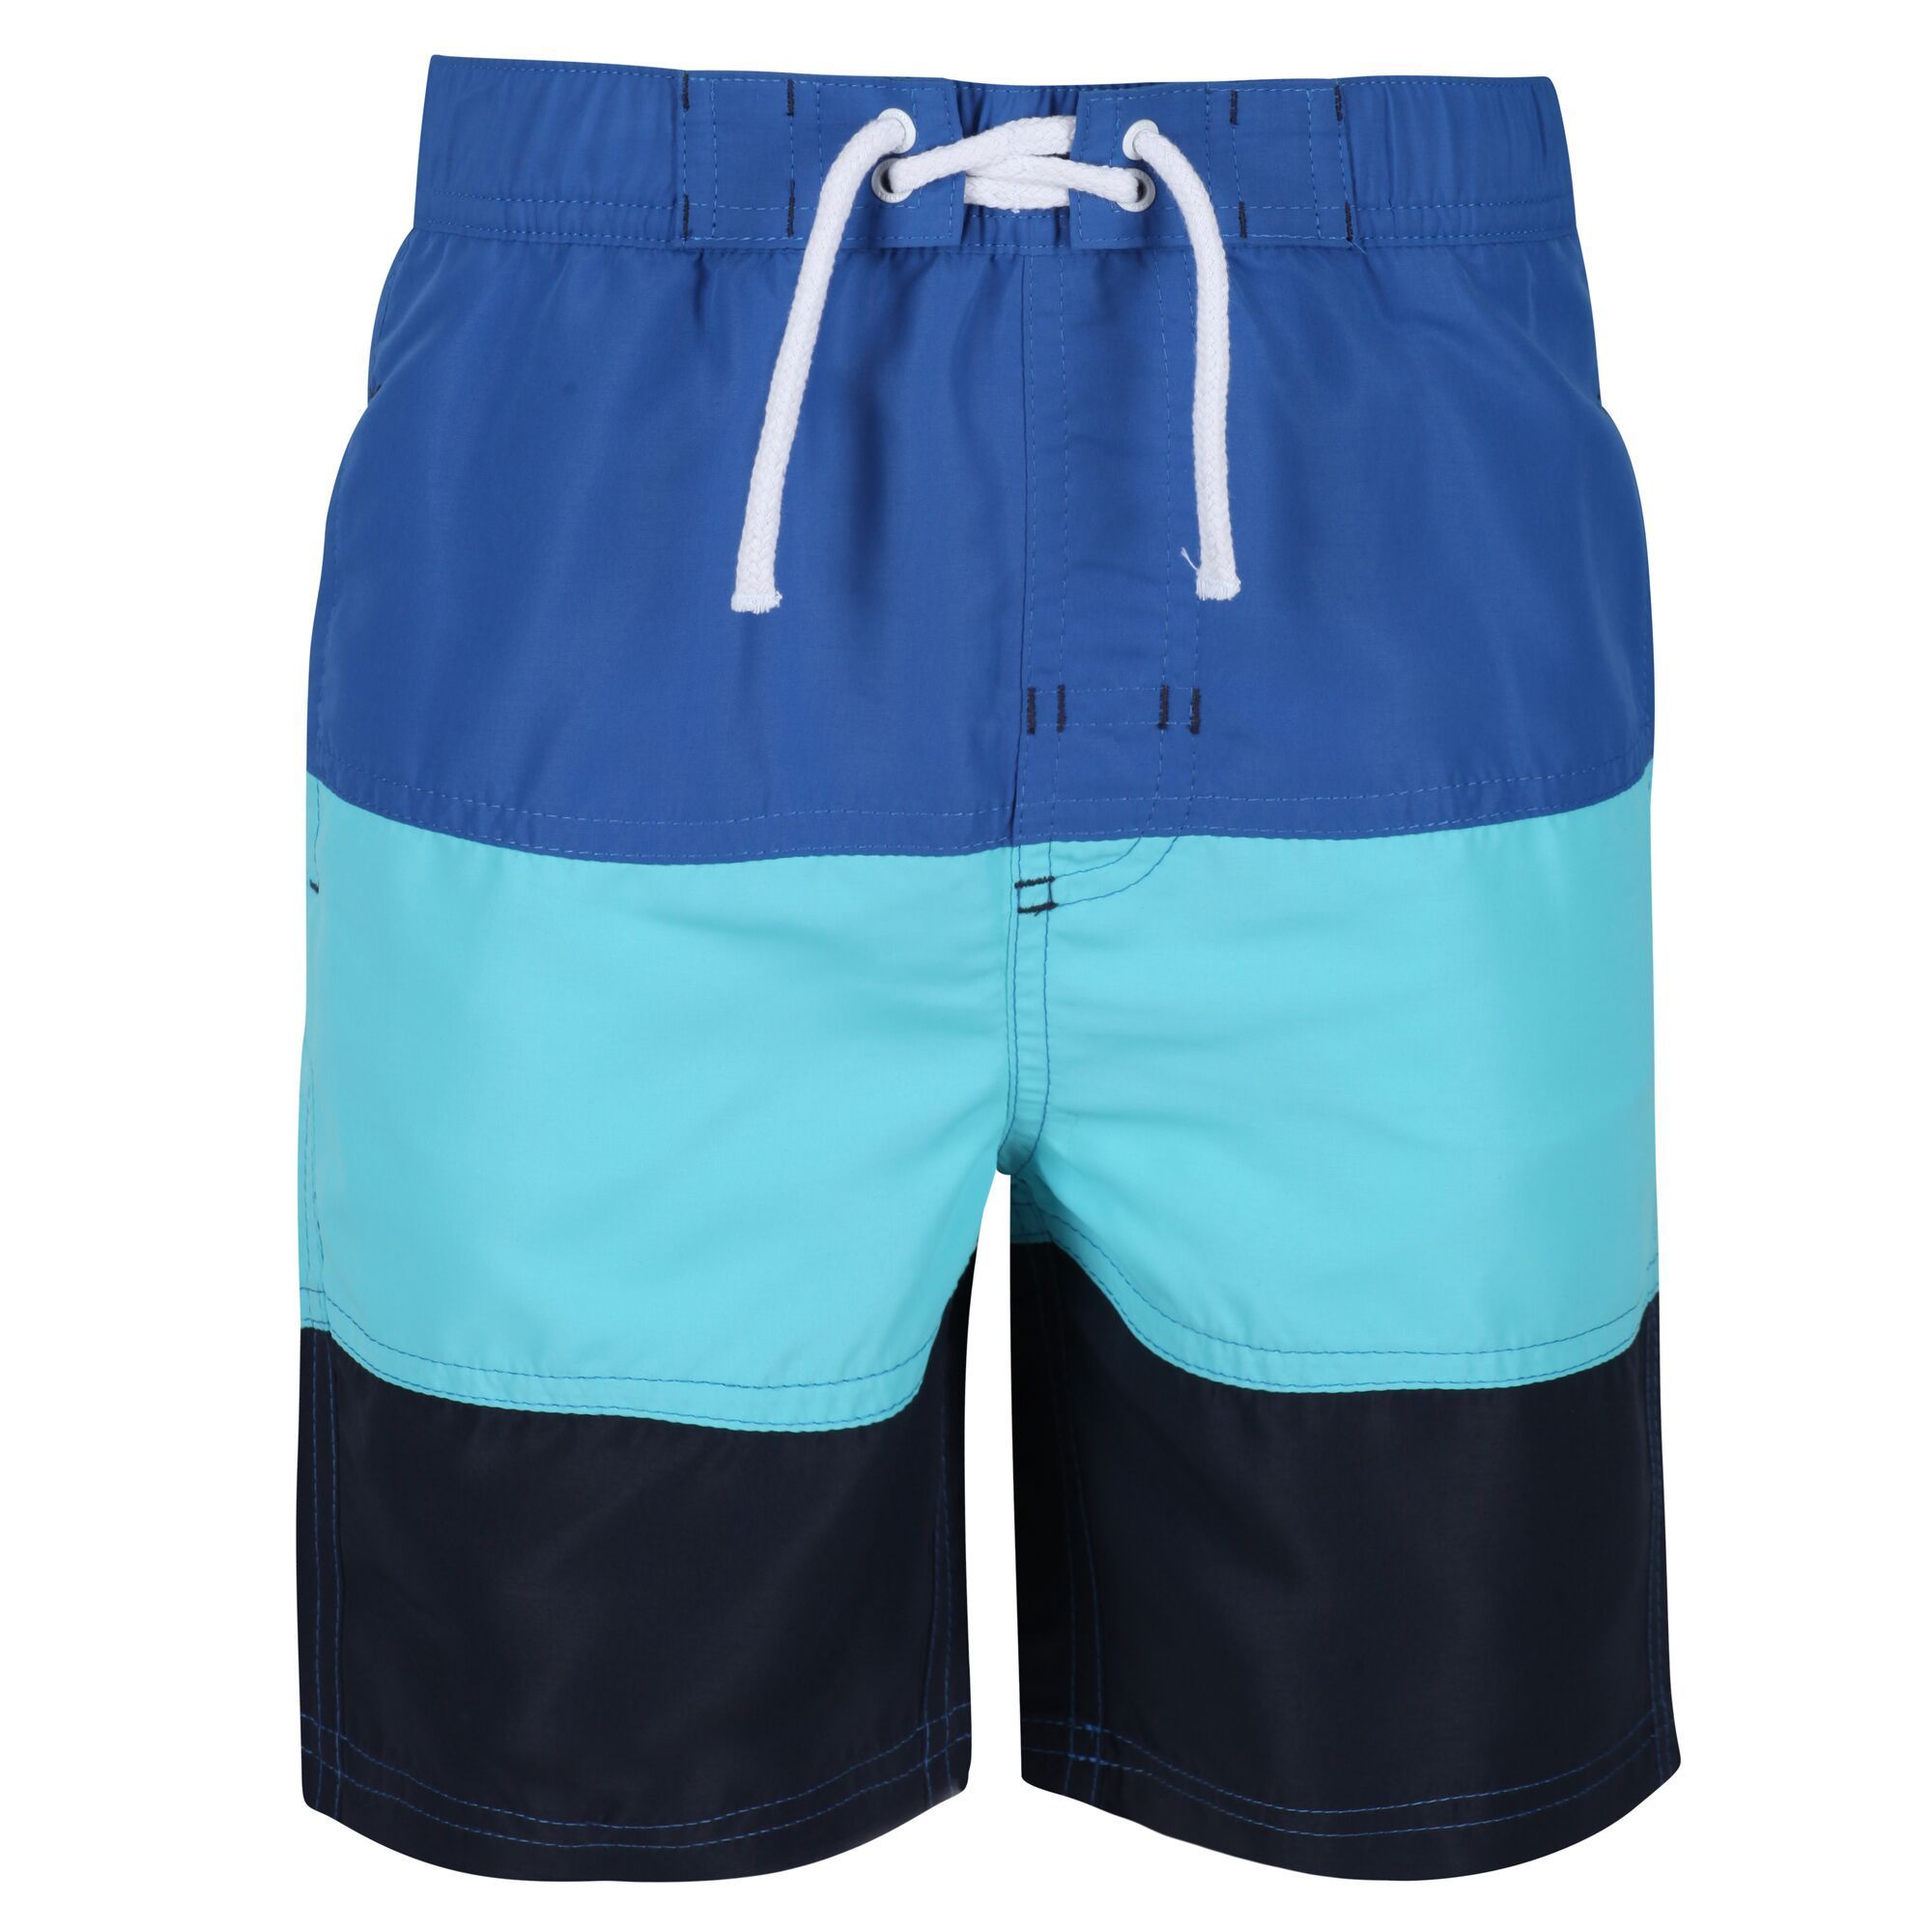 Material: 100% Polyester Taslan fabric. Hard-wearing, long-length board shorts with a elasticated waist and fixed drawcord detail. Quick drying fabric shorts with mesh brief liner. 2 side pockets and 1 back pocket.